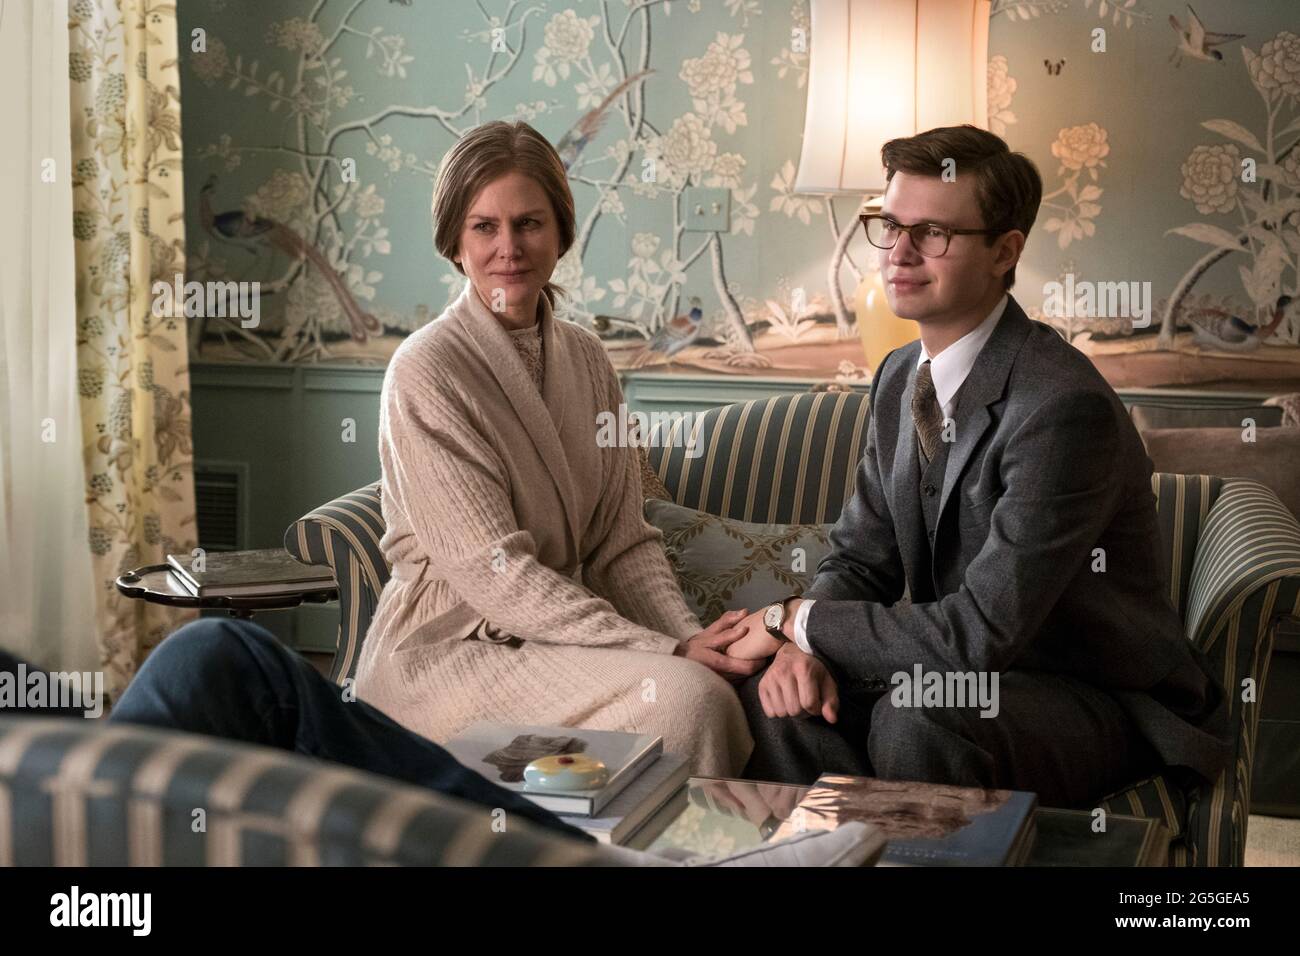 The Goldfinch (2019) directed by John Crowley and starring Oakes Fegley as Theo Decker and Nicole Kidman as Mrs Barbour in this big screen adaptation of Donna Tartt's novel about a boy who steals a painting in the aftermath of a bombing at the Metropolitan Museum of Art that kills his mother. Stock Photo